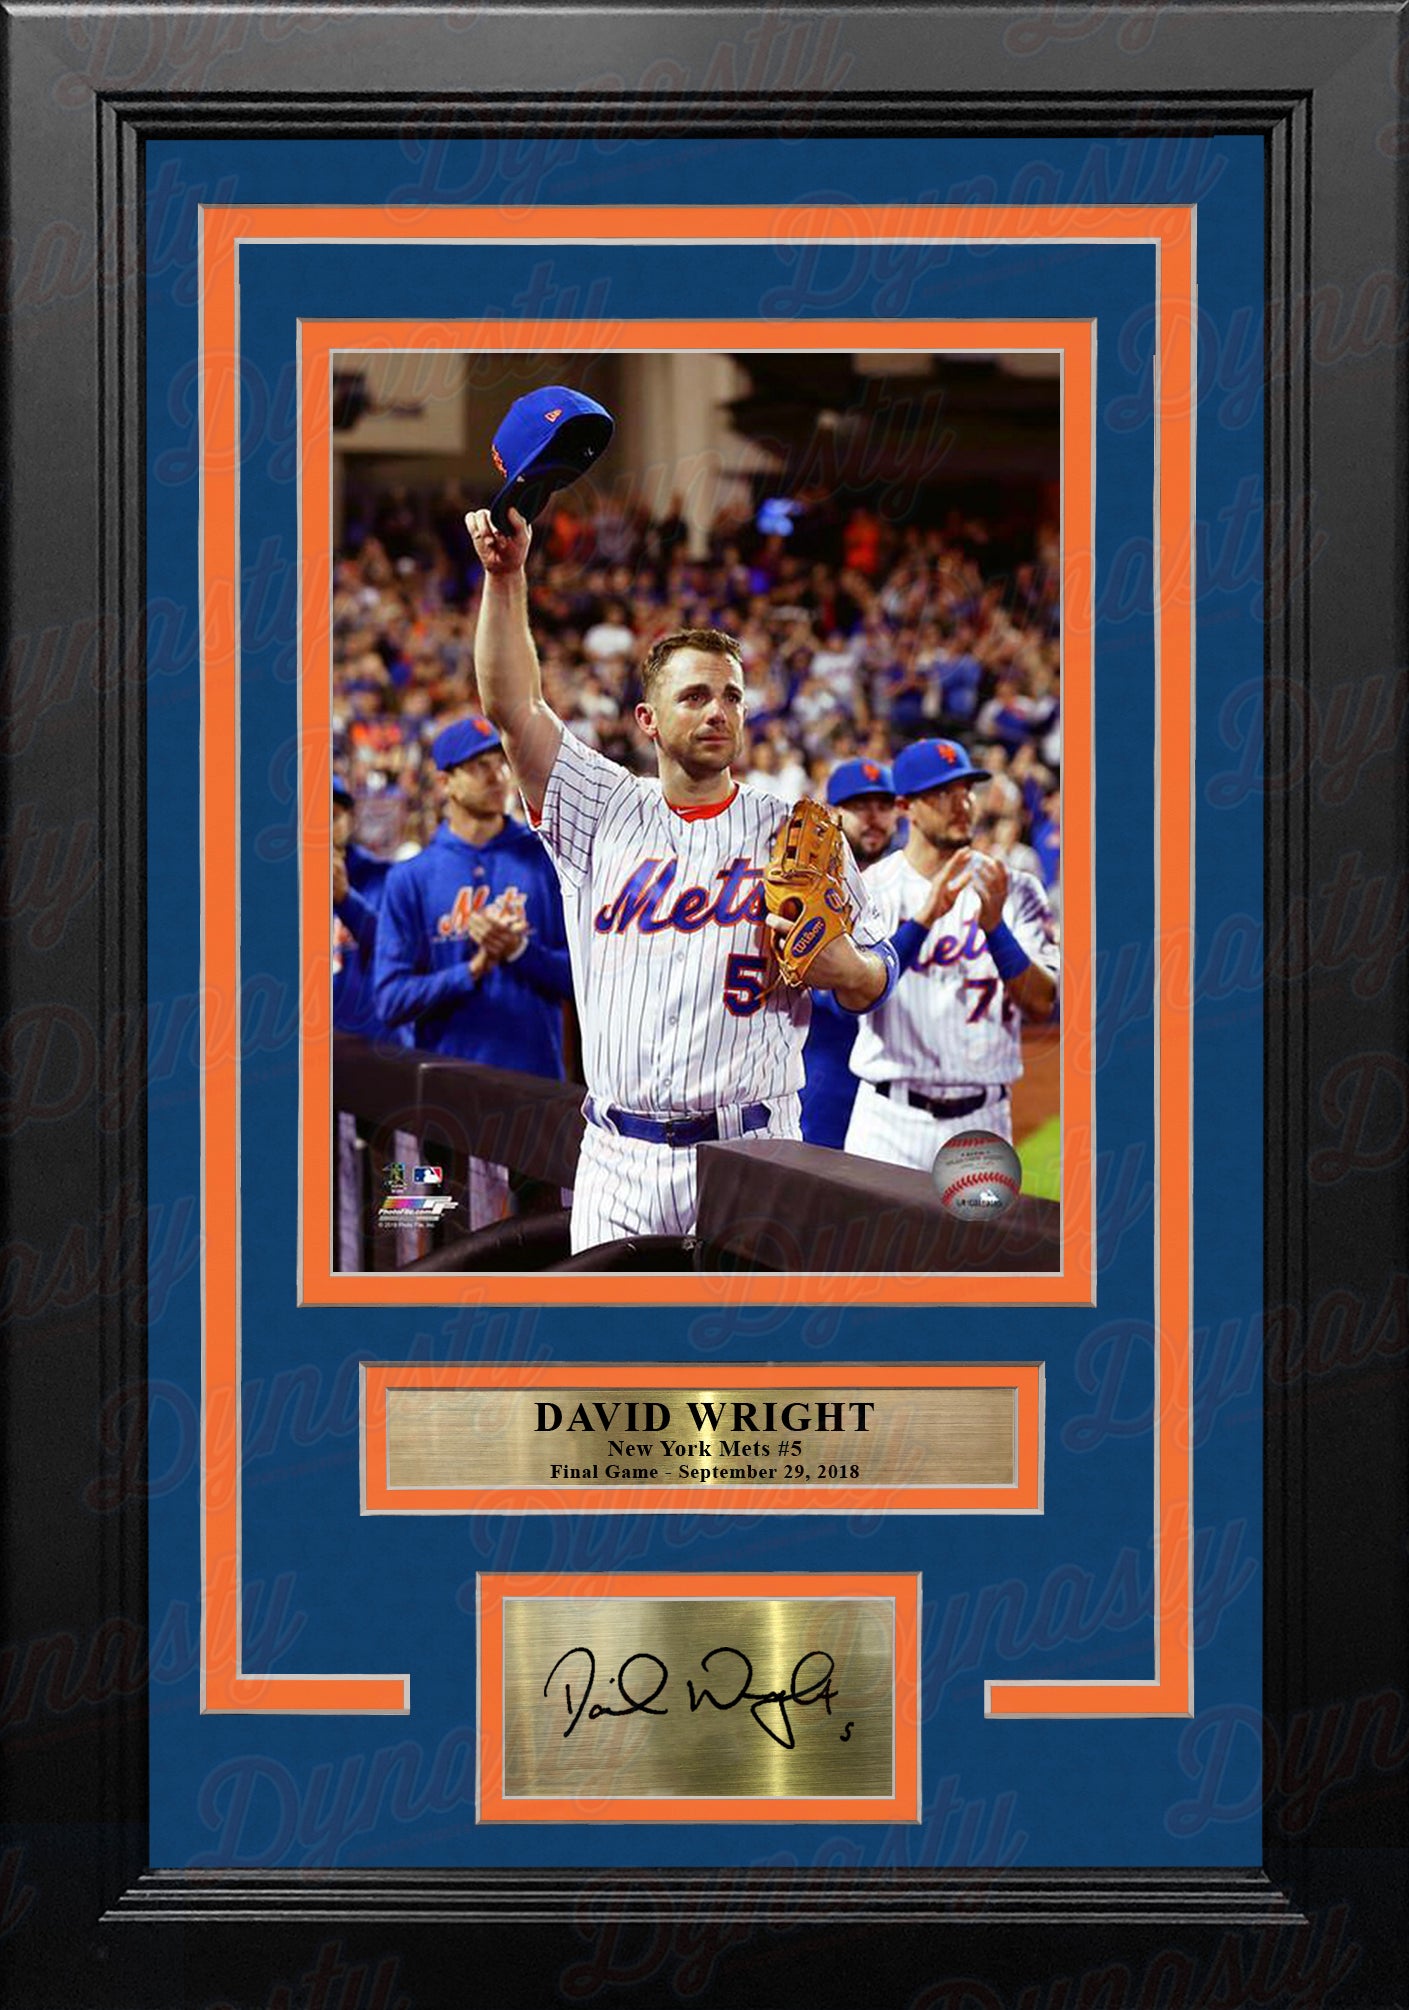 David Wright Final Game New York Mets 8" x 10" Framed Baseball Photo with Engraved Autograph - Dynasty Sports & Framing 